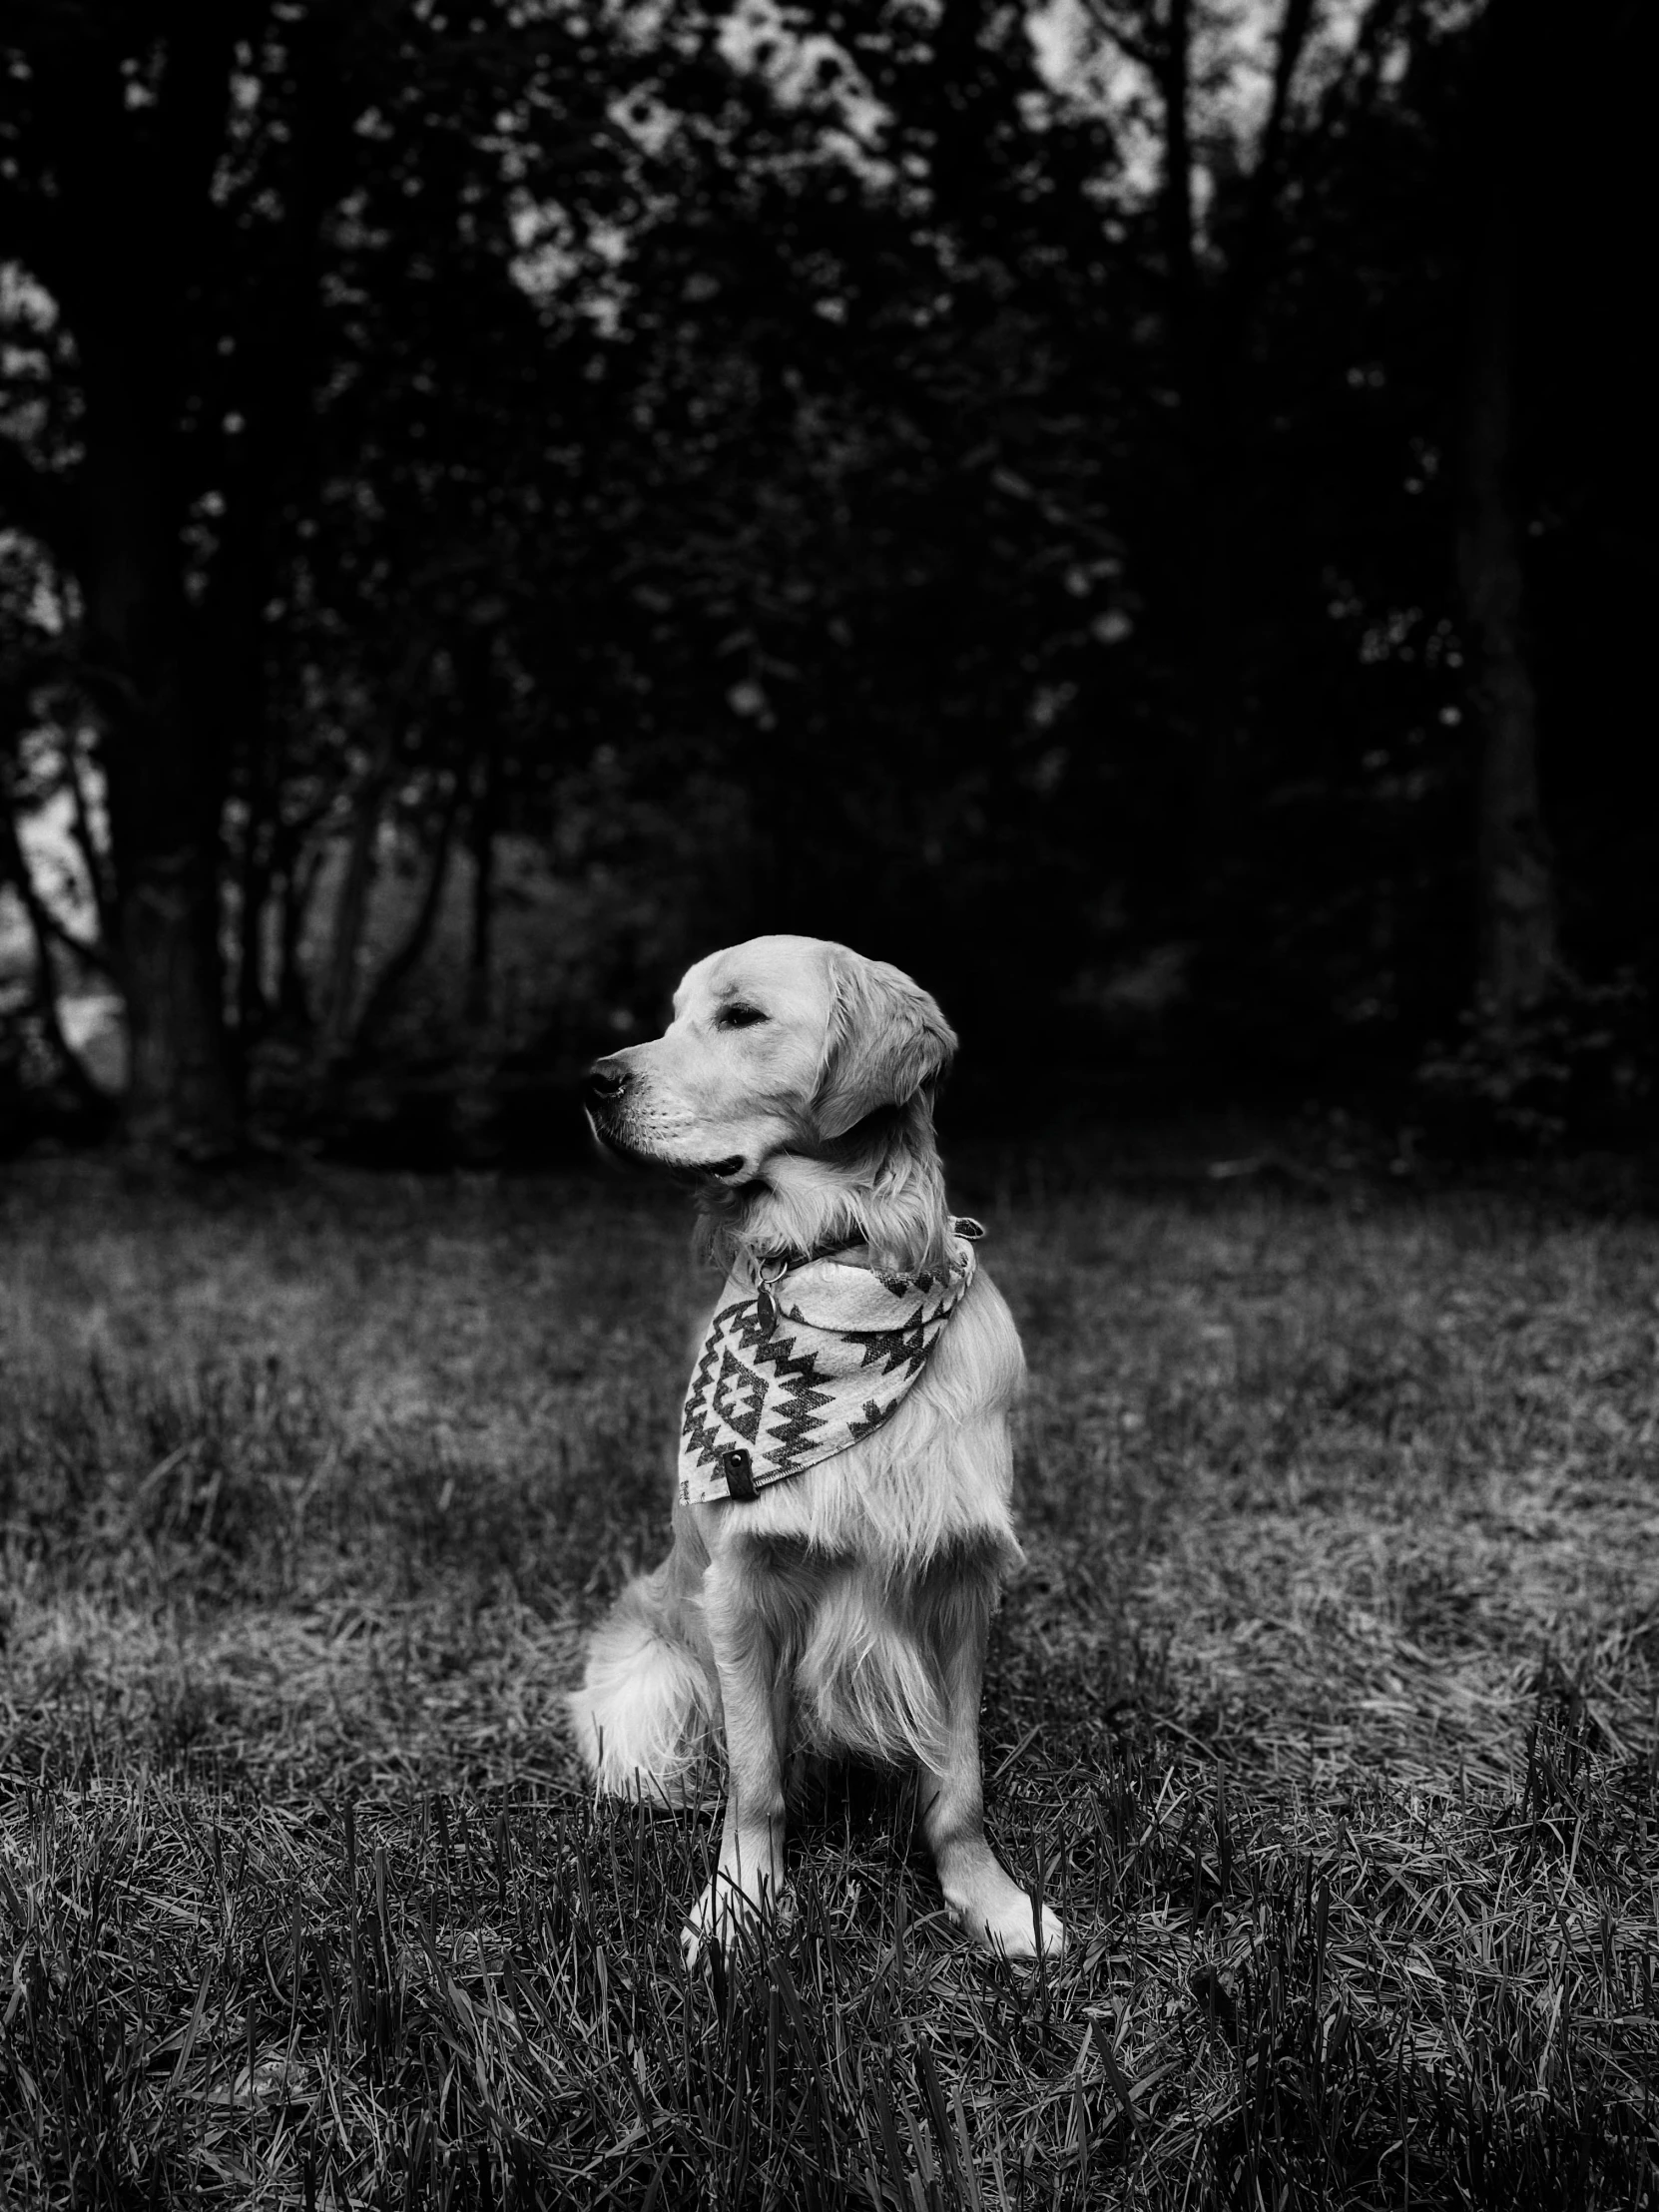 a dog that is sitting in the grass, a black and white photo, by Lucia Peka, art photography, bandana, golden retriever, shot on iphone 1 3 pro, cinematic photograph